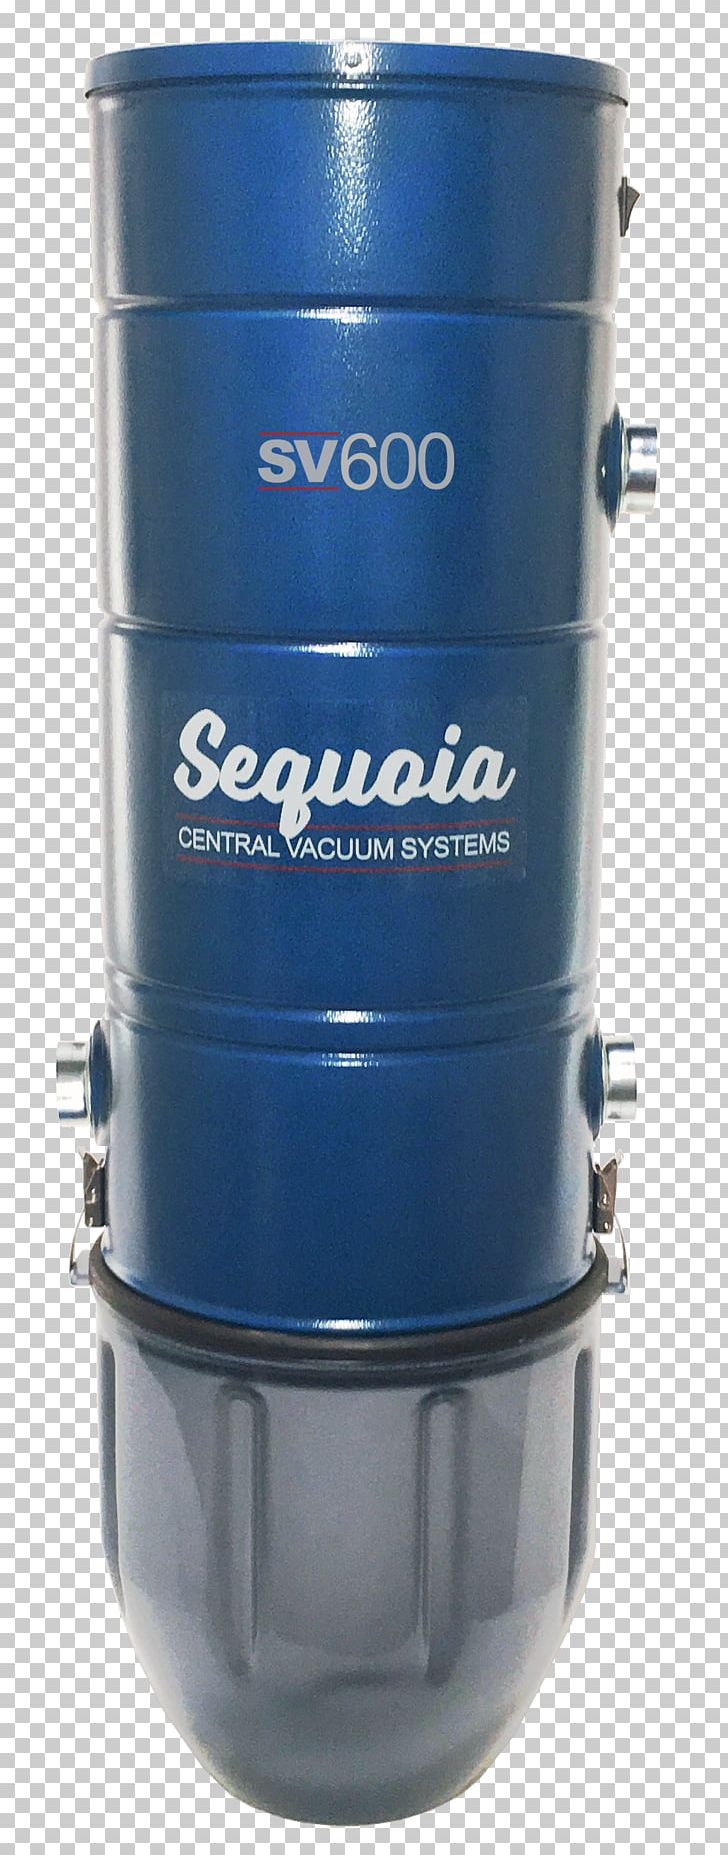 Central Vacuum Cleaner Northern California PNG, Clipart, California, Central Processing Unit, Central Vacuum Cleaner, Cobalt, Cobalt Blue Free PNG Download